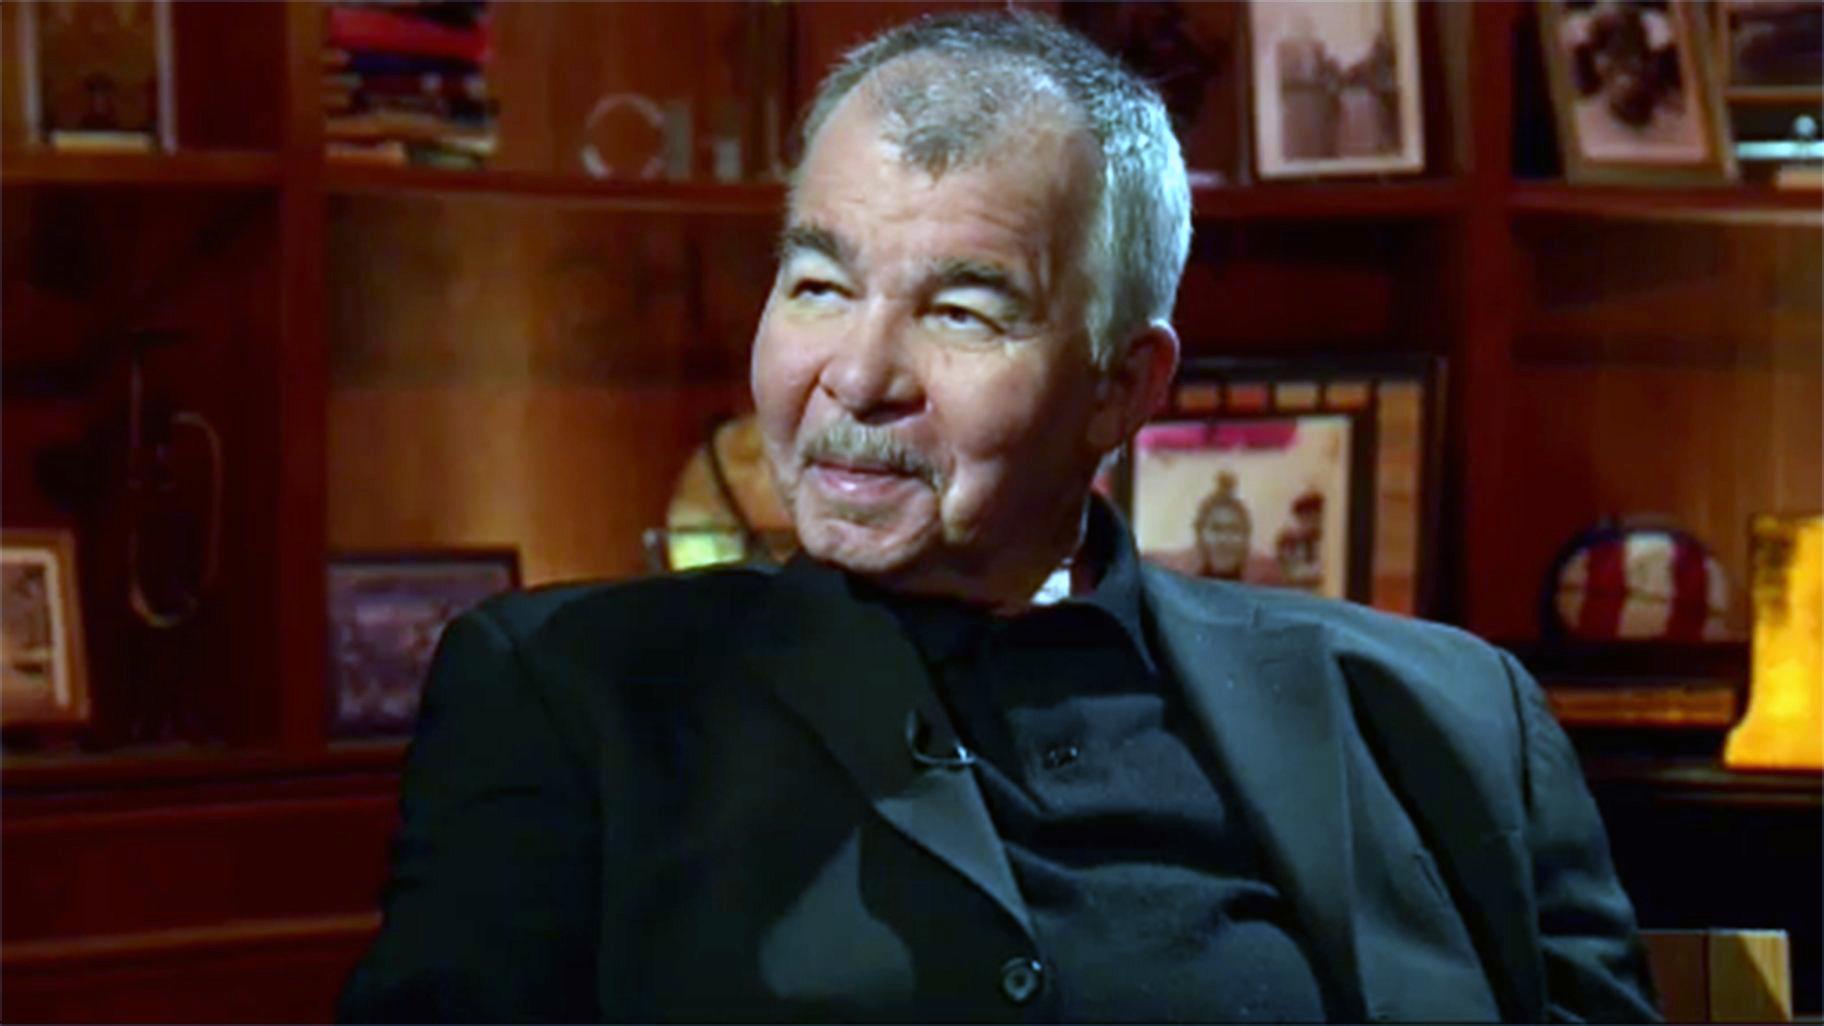 John Prine appears on “Chicago Tonight” on May 12, 2010.